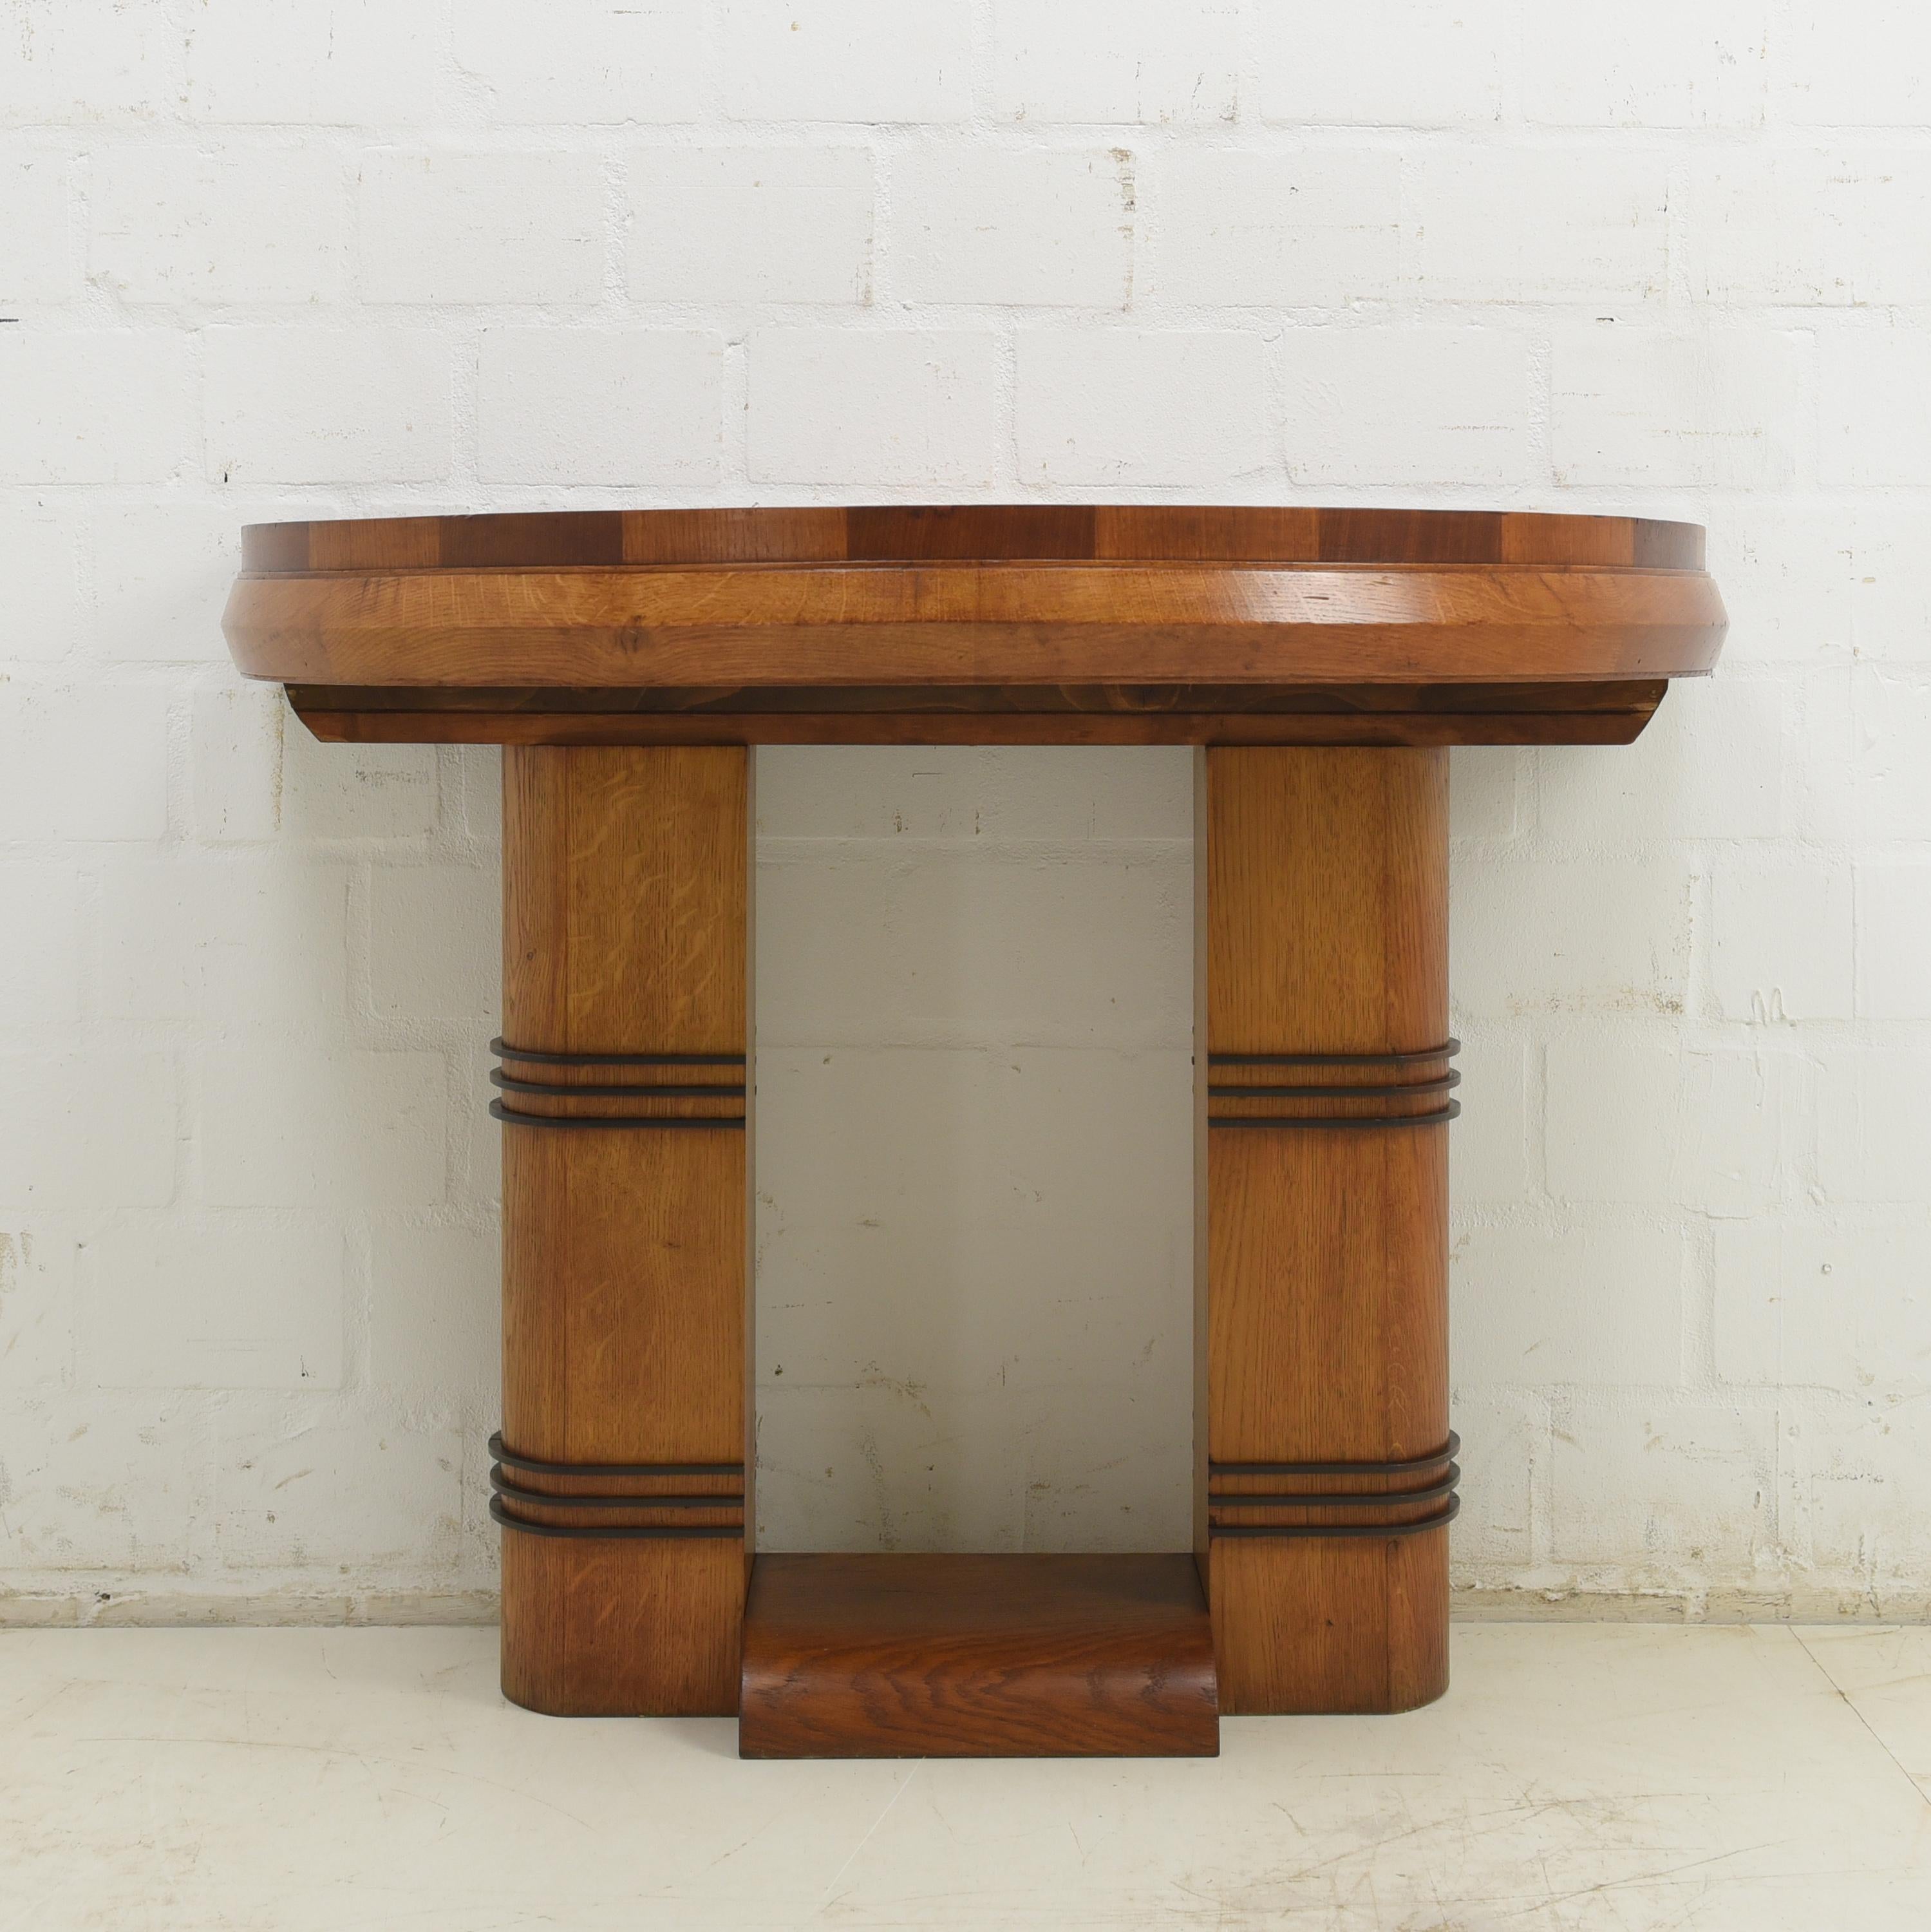 Console table restored Art Deco around 1930 wall table oak mahogany 2/2

Features:
Solid oak and mahogany
High quality
Radiating plate
Cool Art Deco design
Rare model
In another listing we offer an identical table

Additional